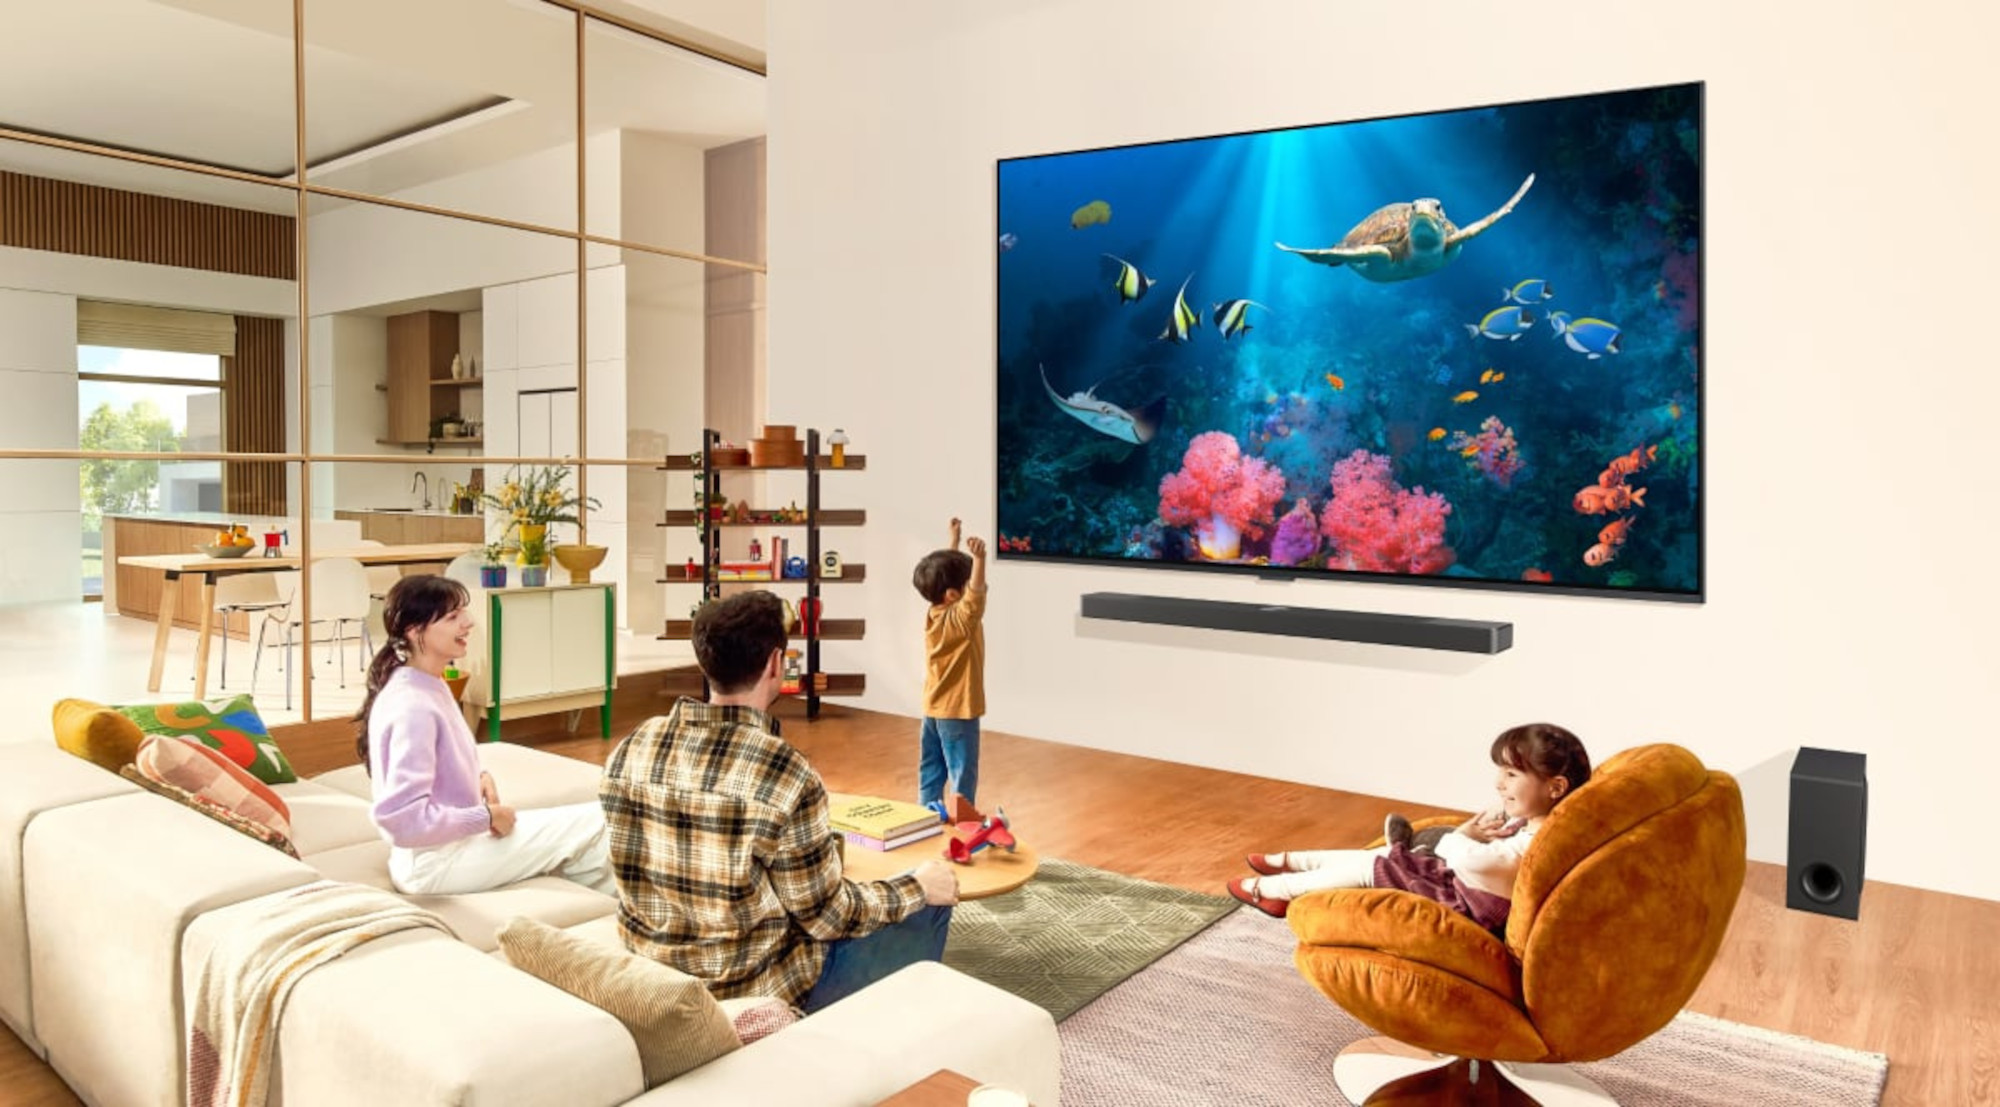 LG QNED99T TV on wall in living room